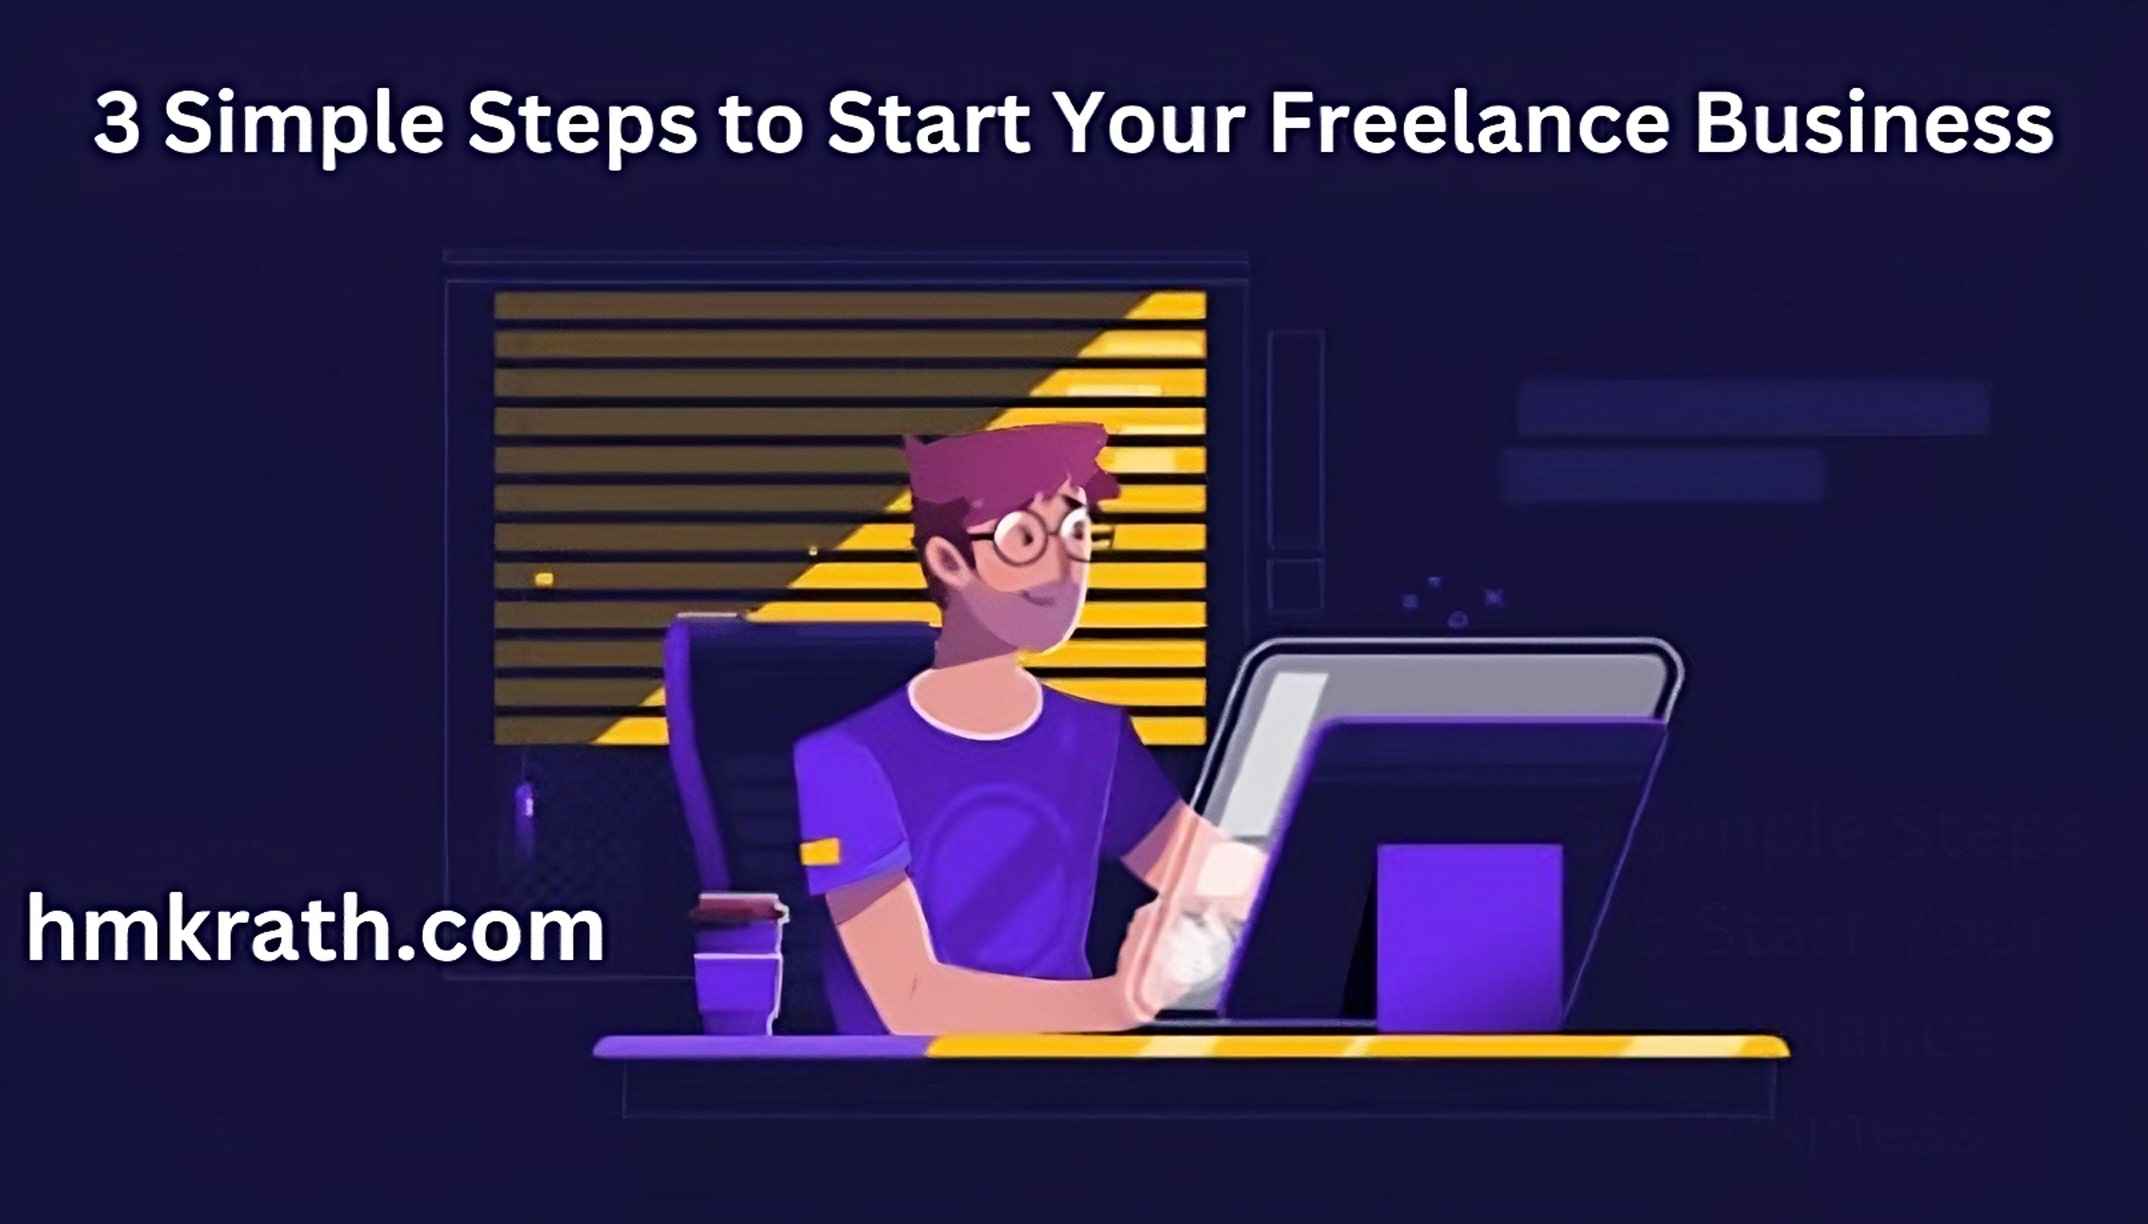 3 Simple Steps to Start Your Freelance Business